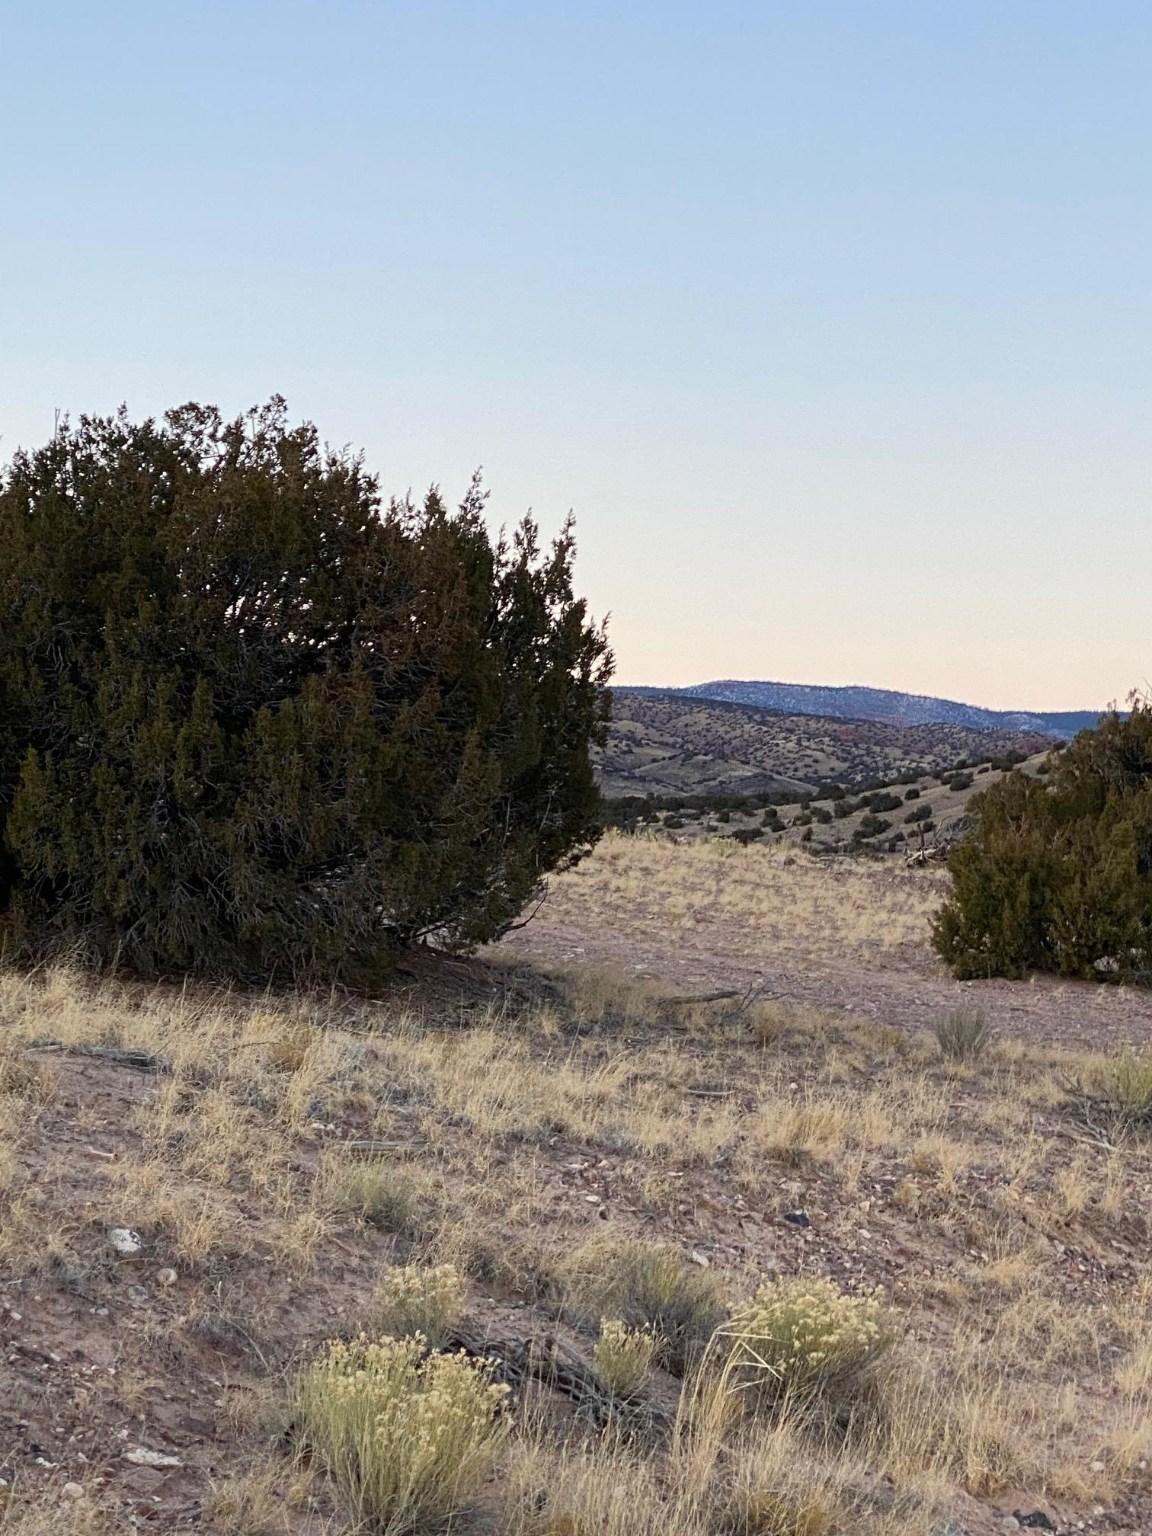 TBD COUNTY ROAD 156, Abiquiu, New Mexico 87510, ,Land,For Sale,TBD COUNTY ROAD 156,202105449